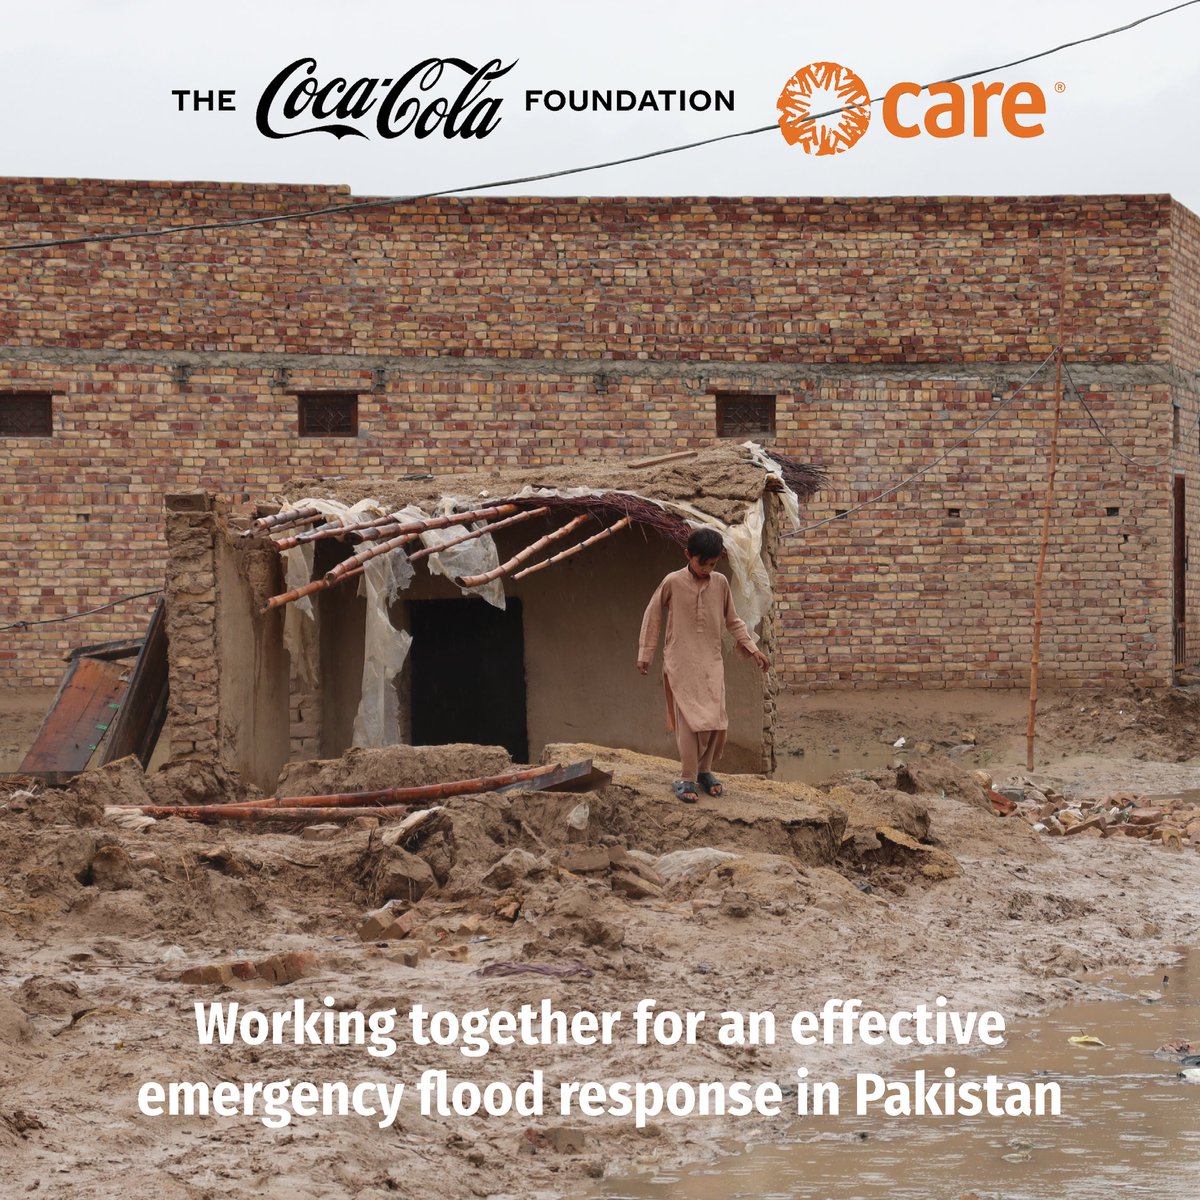 To further @CAREPakistan_ commitment to uplift Pakistan’s vulnerable communities in remote areas. @CAREPakistan_ in partnership with @CocaColaCo @cocacolapak is working together on immediate relief efforts in Pakistan for approximately 1,000 households #TCCF #CARE #FloodRelief